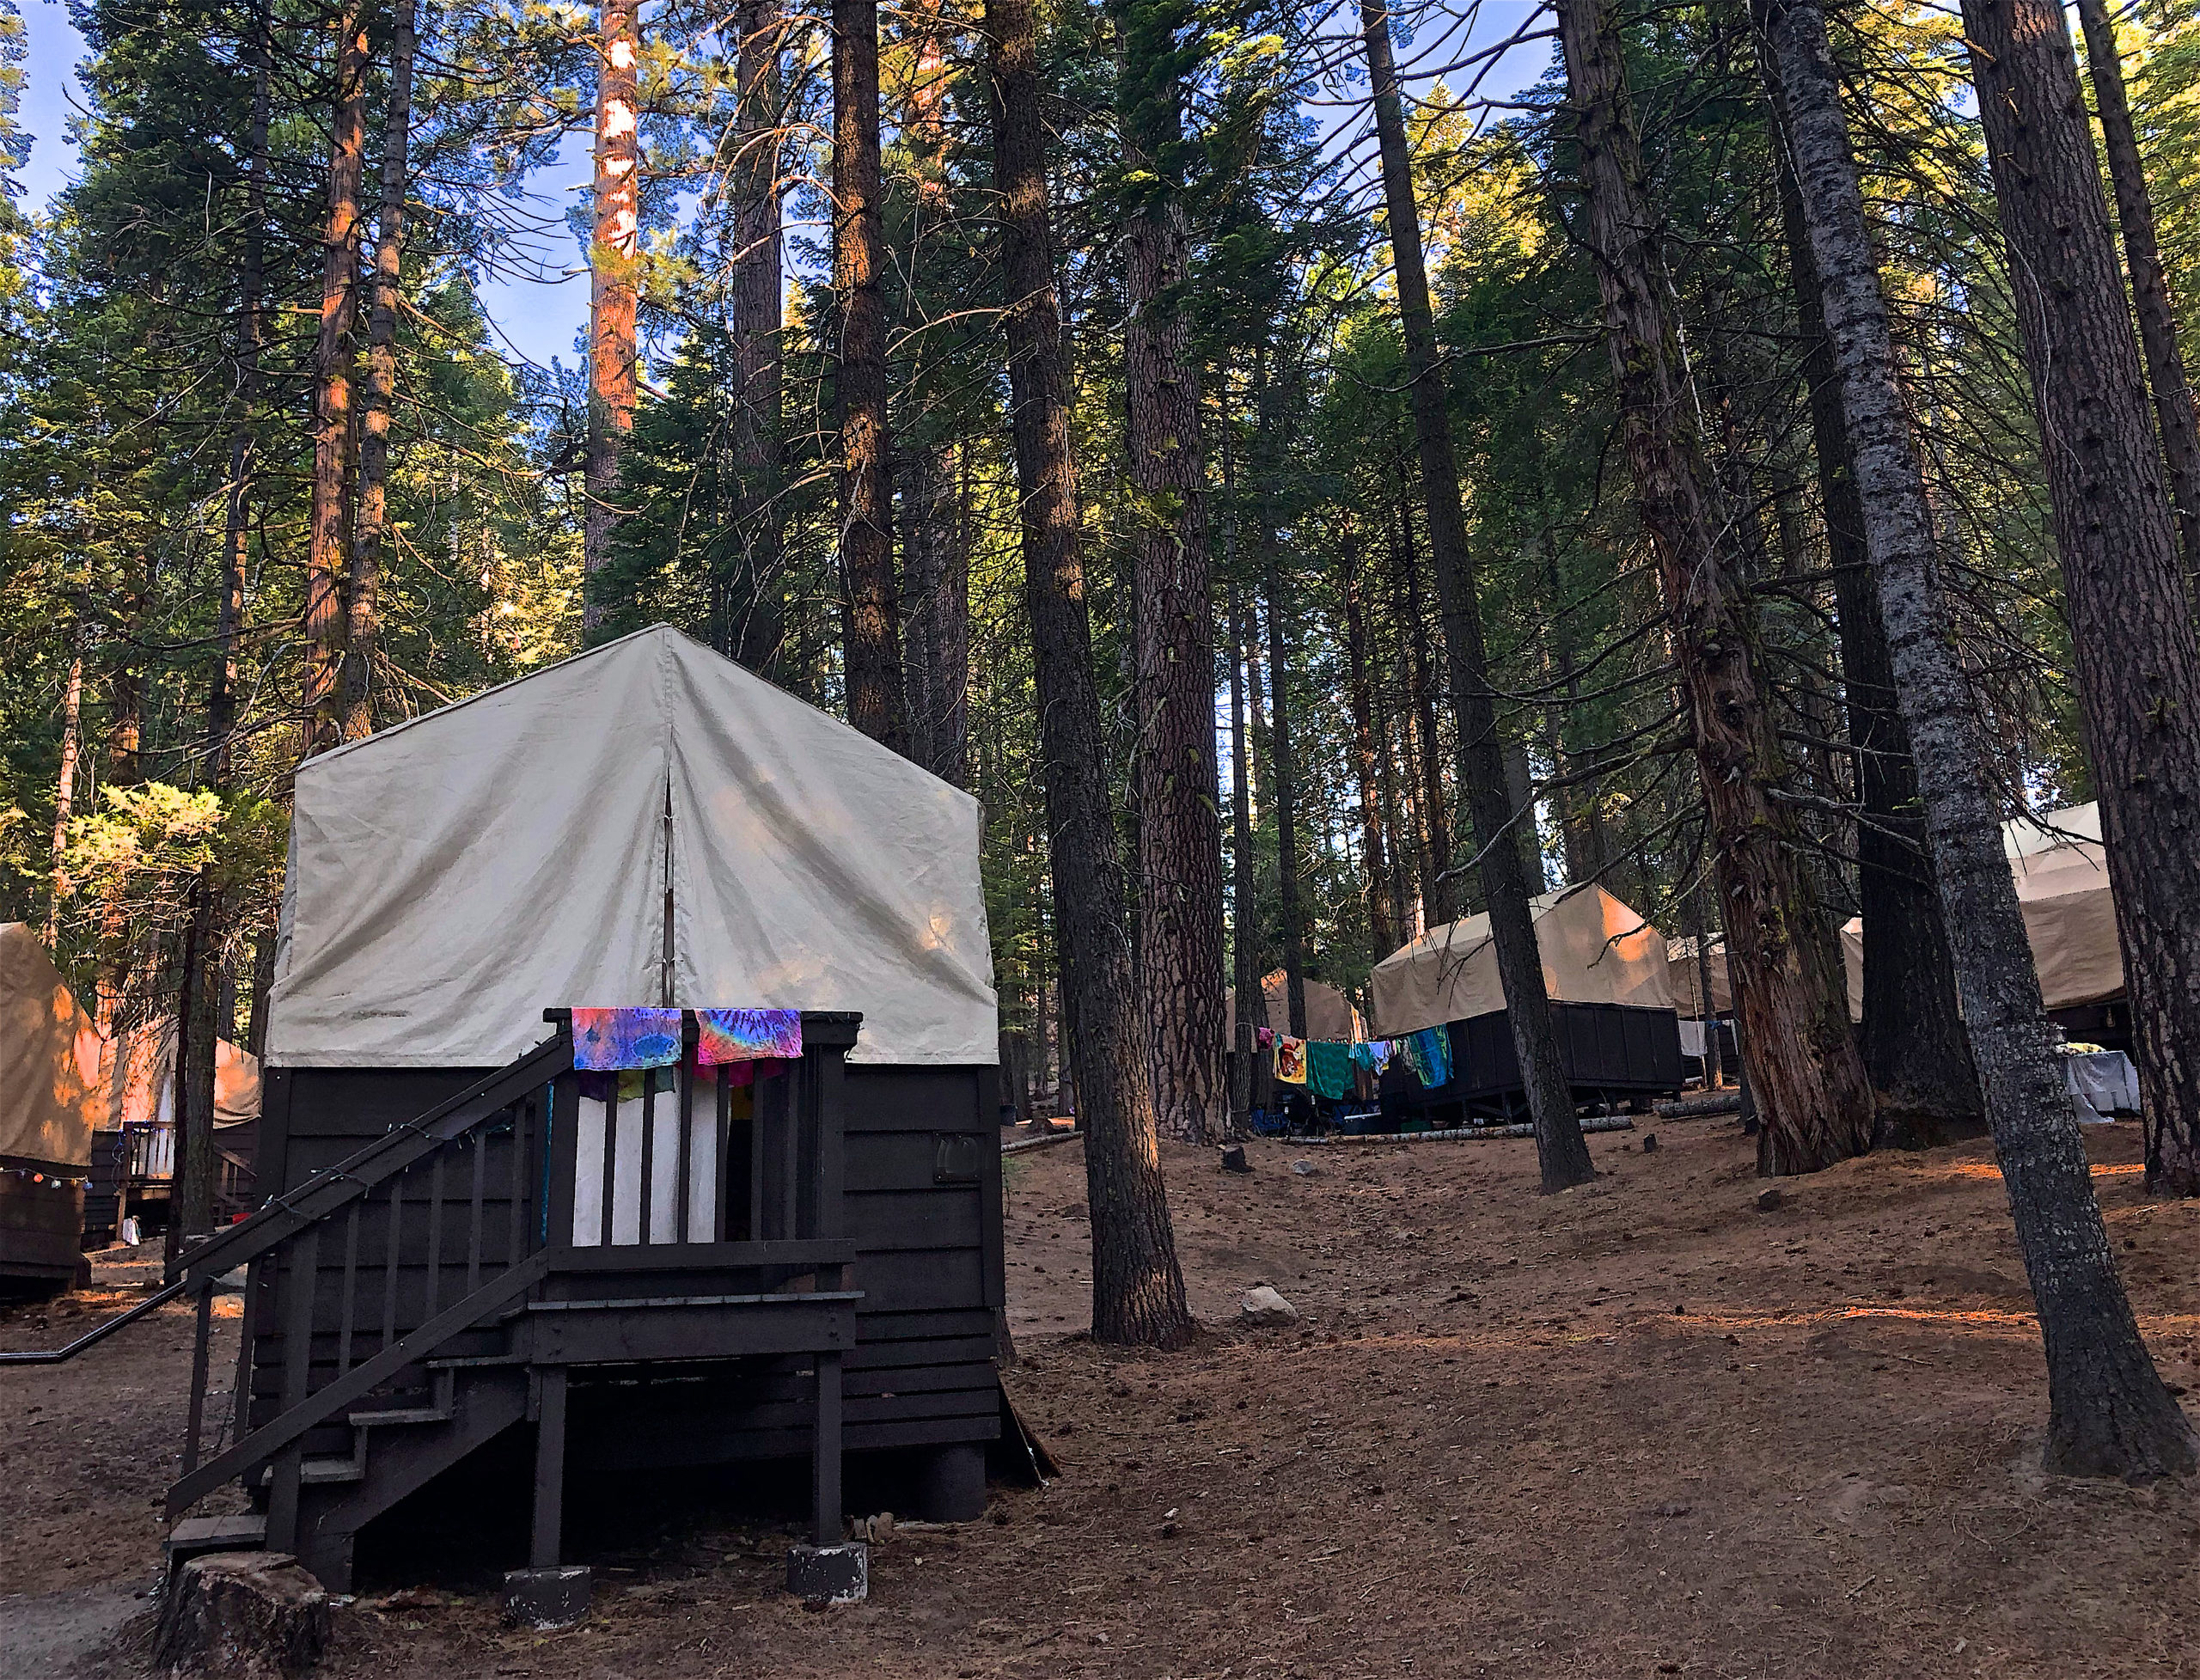 A tent at the Lair of the Golden Bear among the trees on a sunny day.